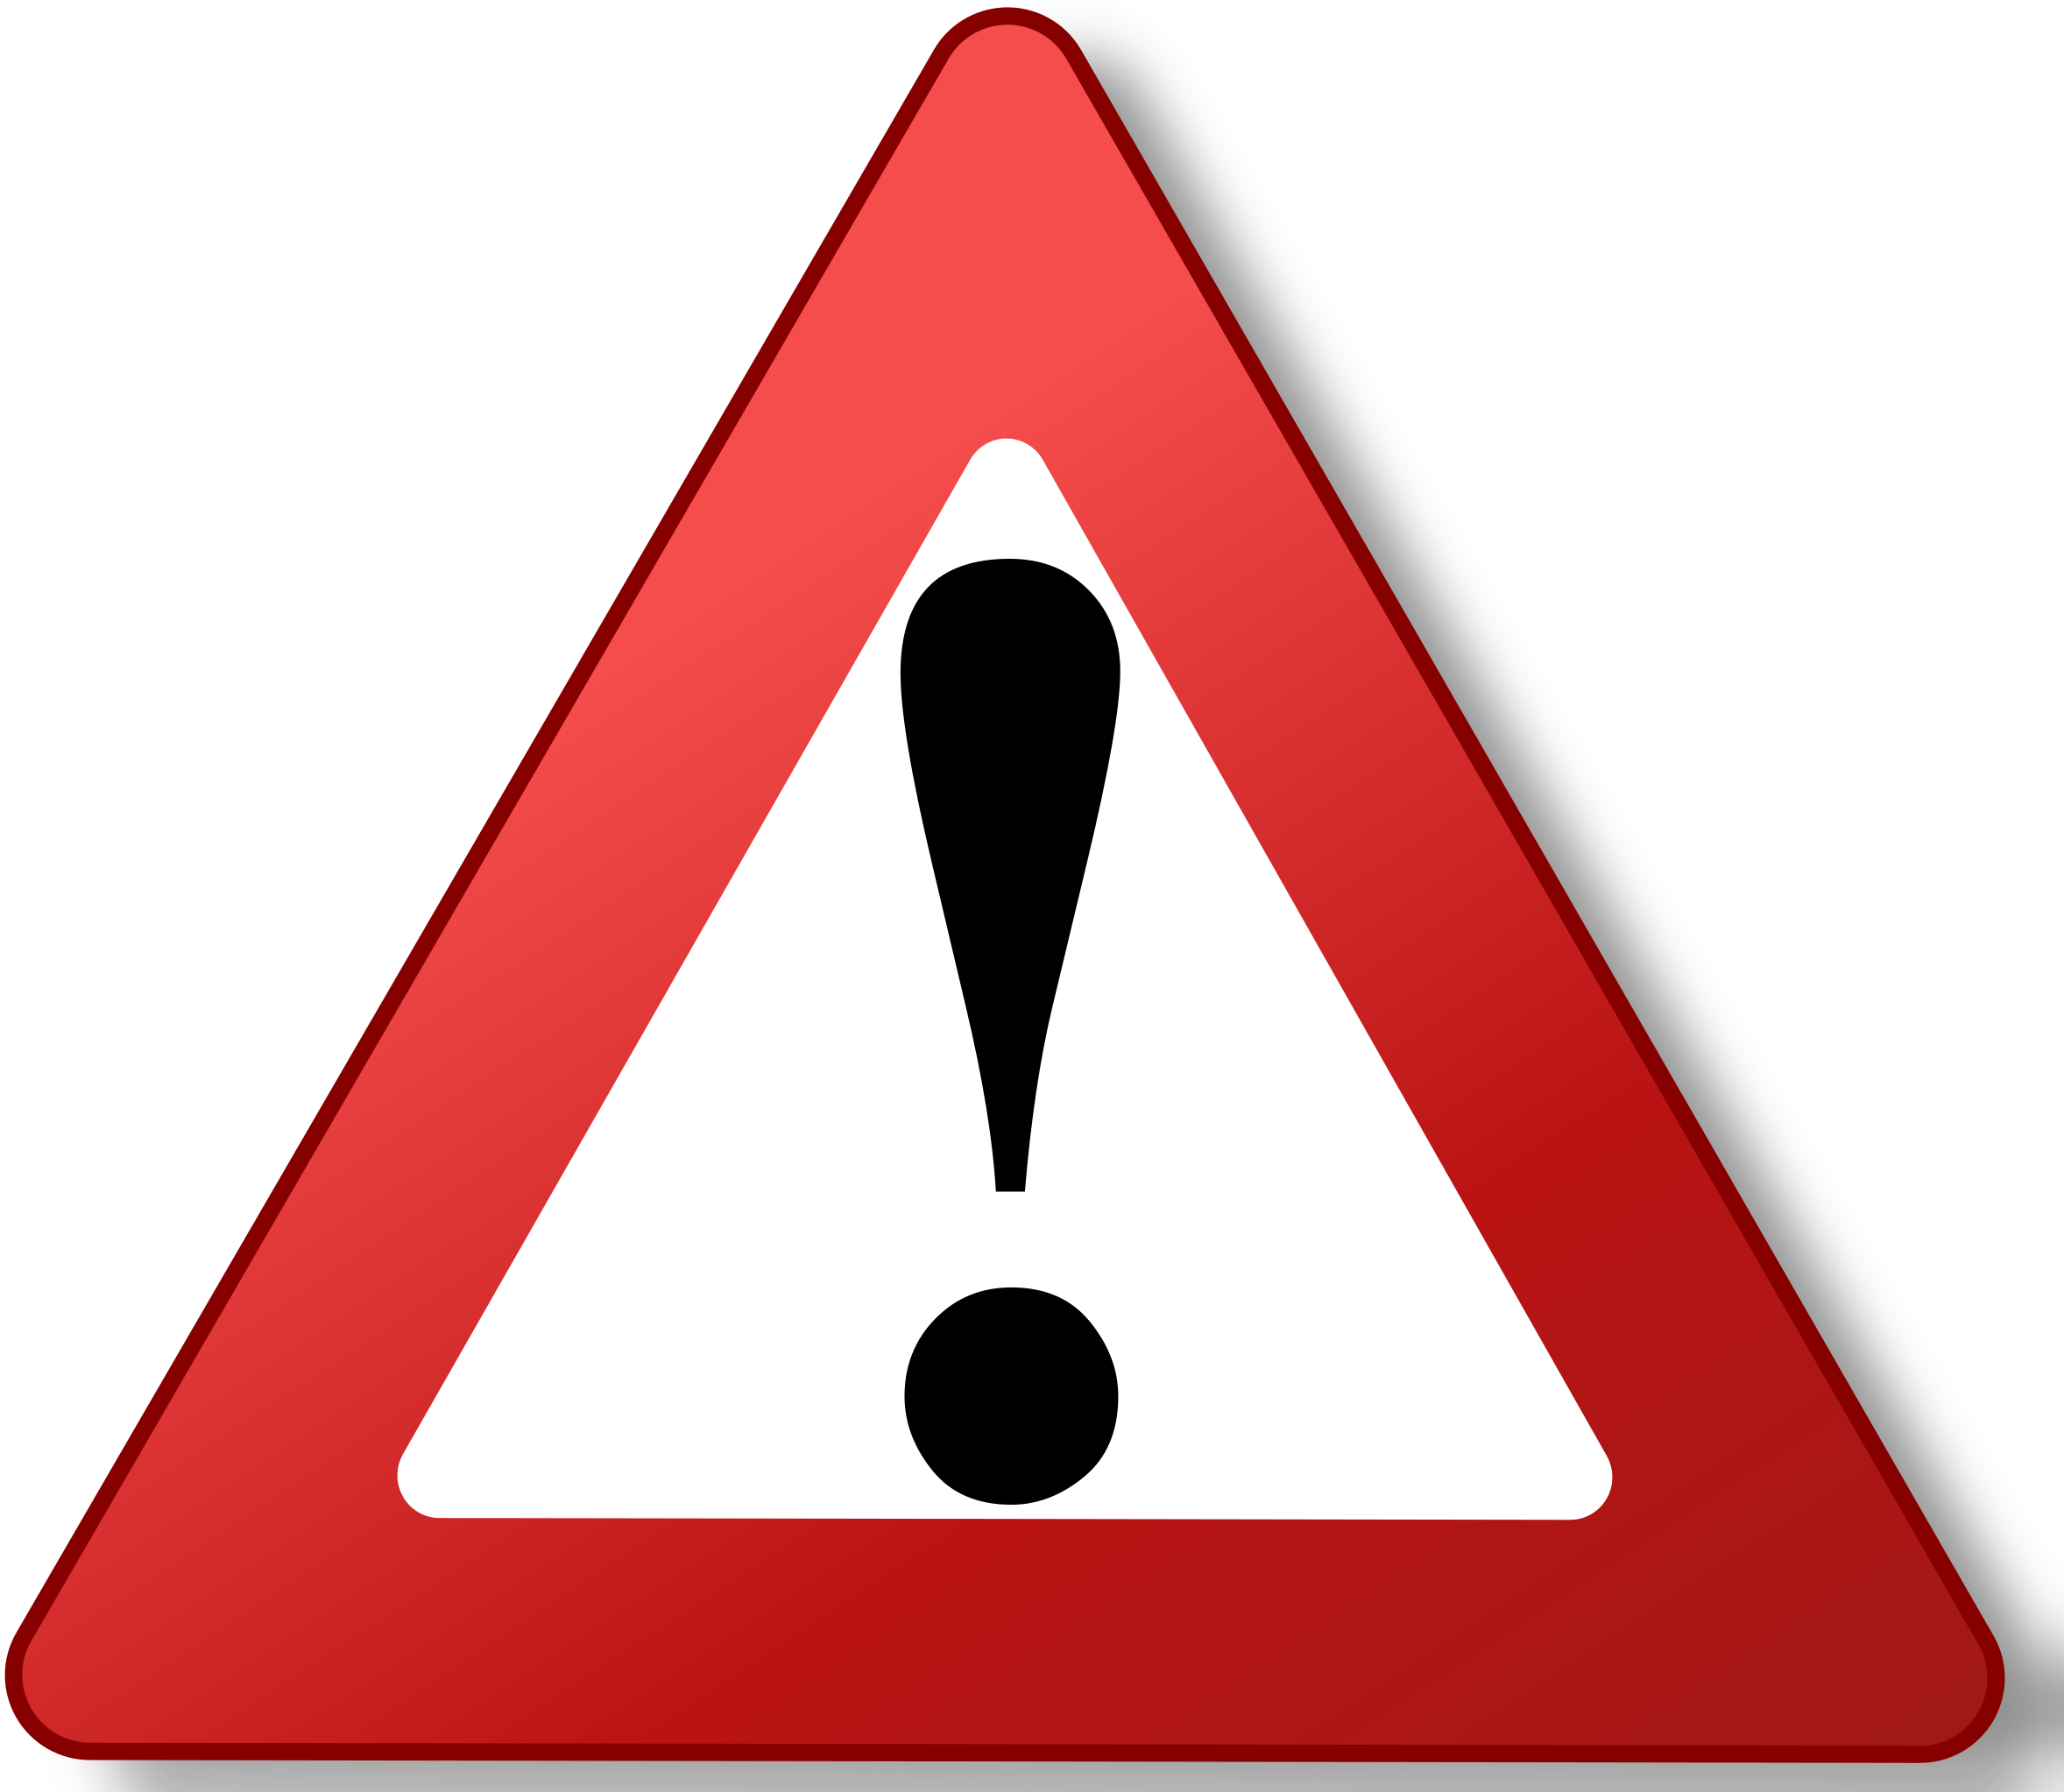 Warning symbol or red exclamation mark